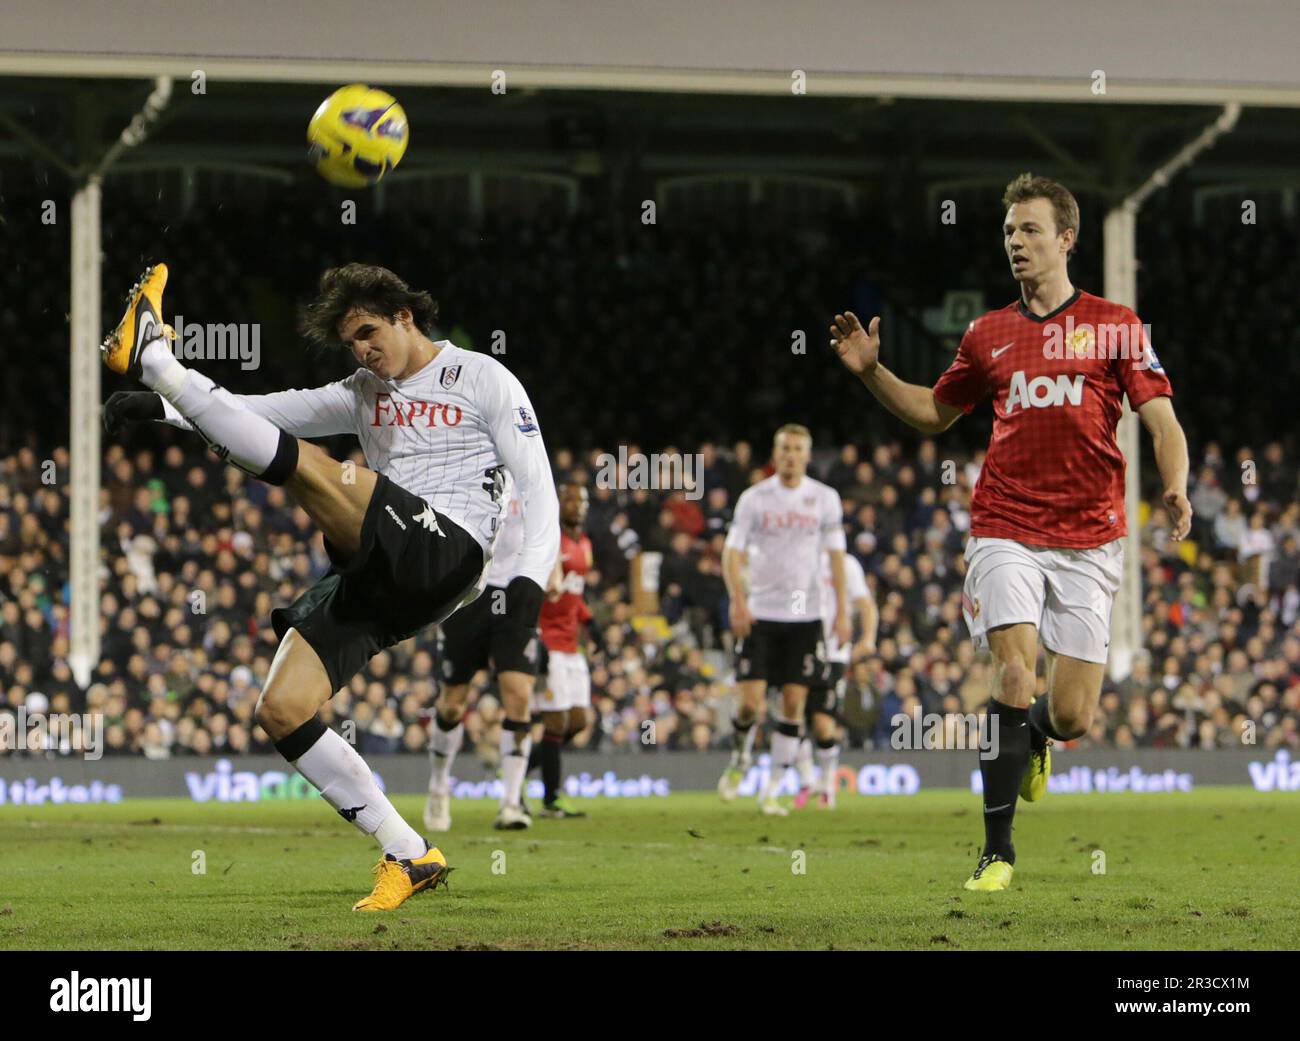 Fulham's Bryan Ruiz clears the ball to safety. The game is goallessFulham 02/02/13 Fulham V Manchester United  02/02/13 The Premier League Photo: Rich Stock Photo